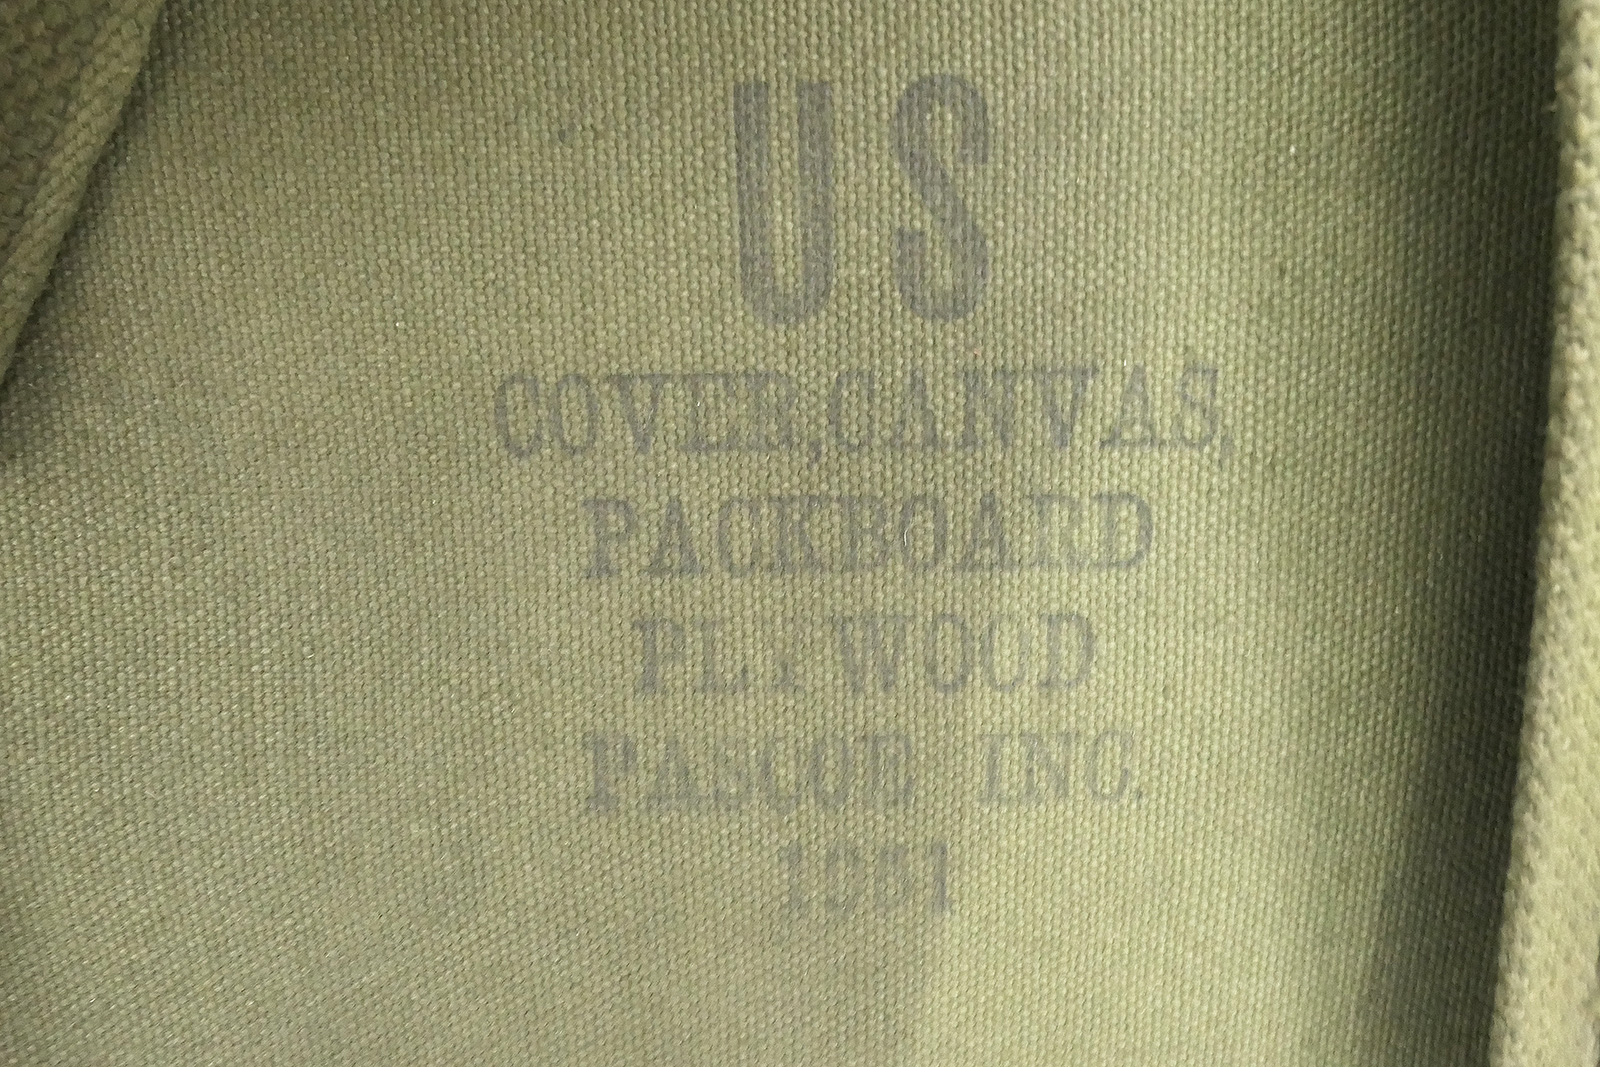 Original US ARMY Plywood Packboard Carrying Tray Frame Complete with ...